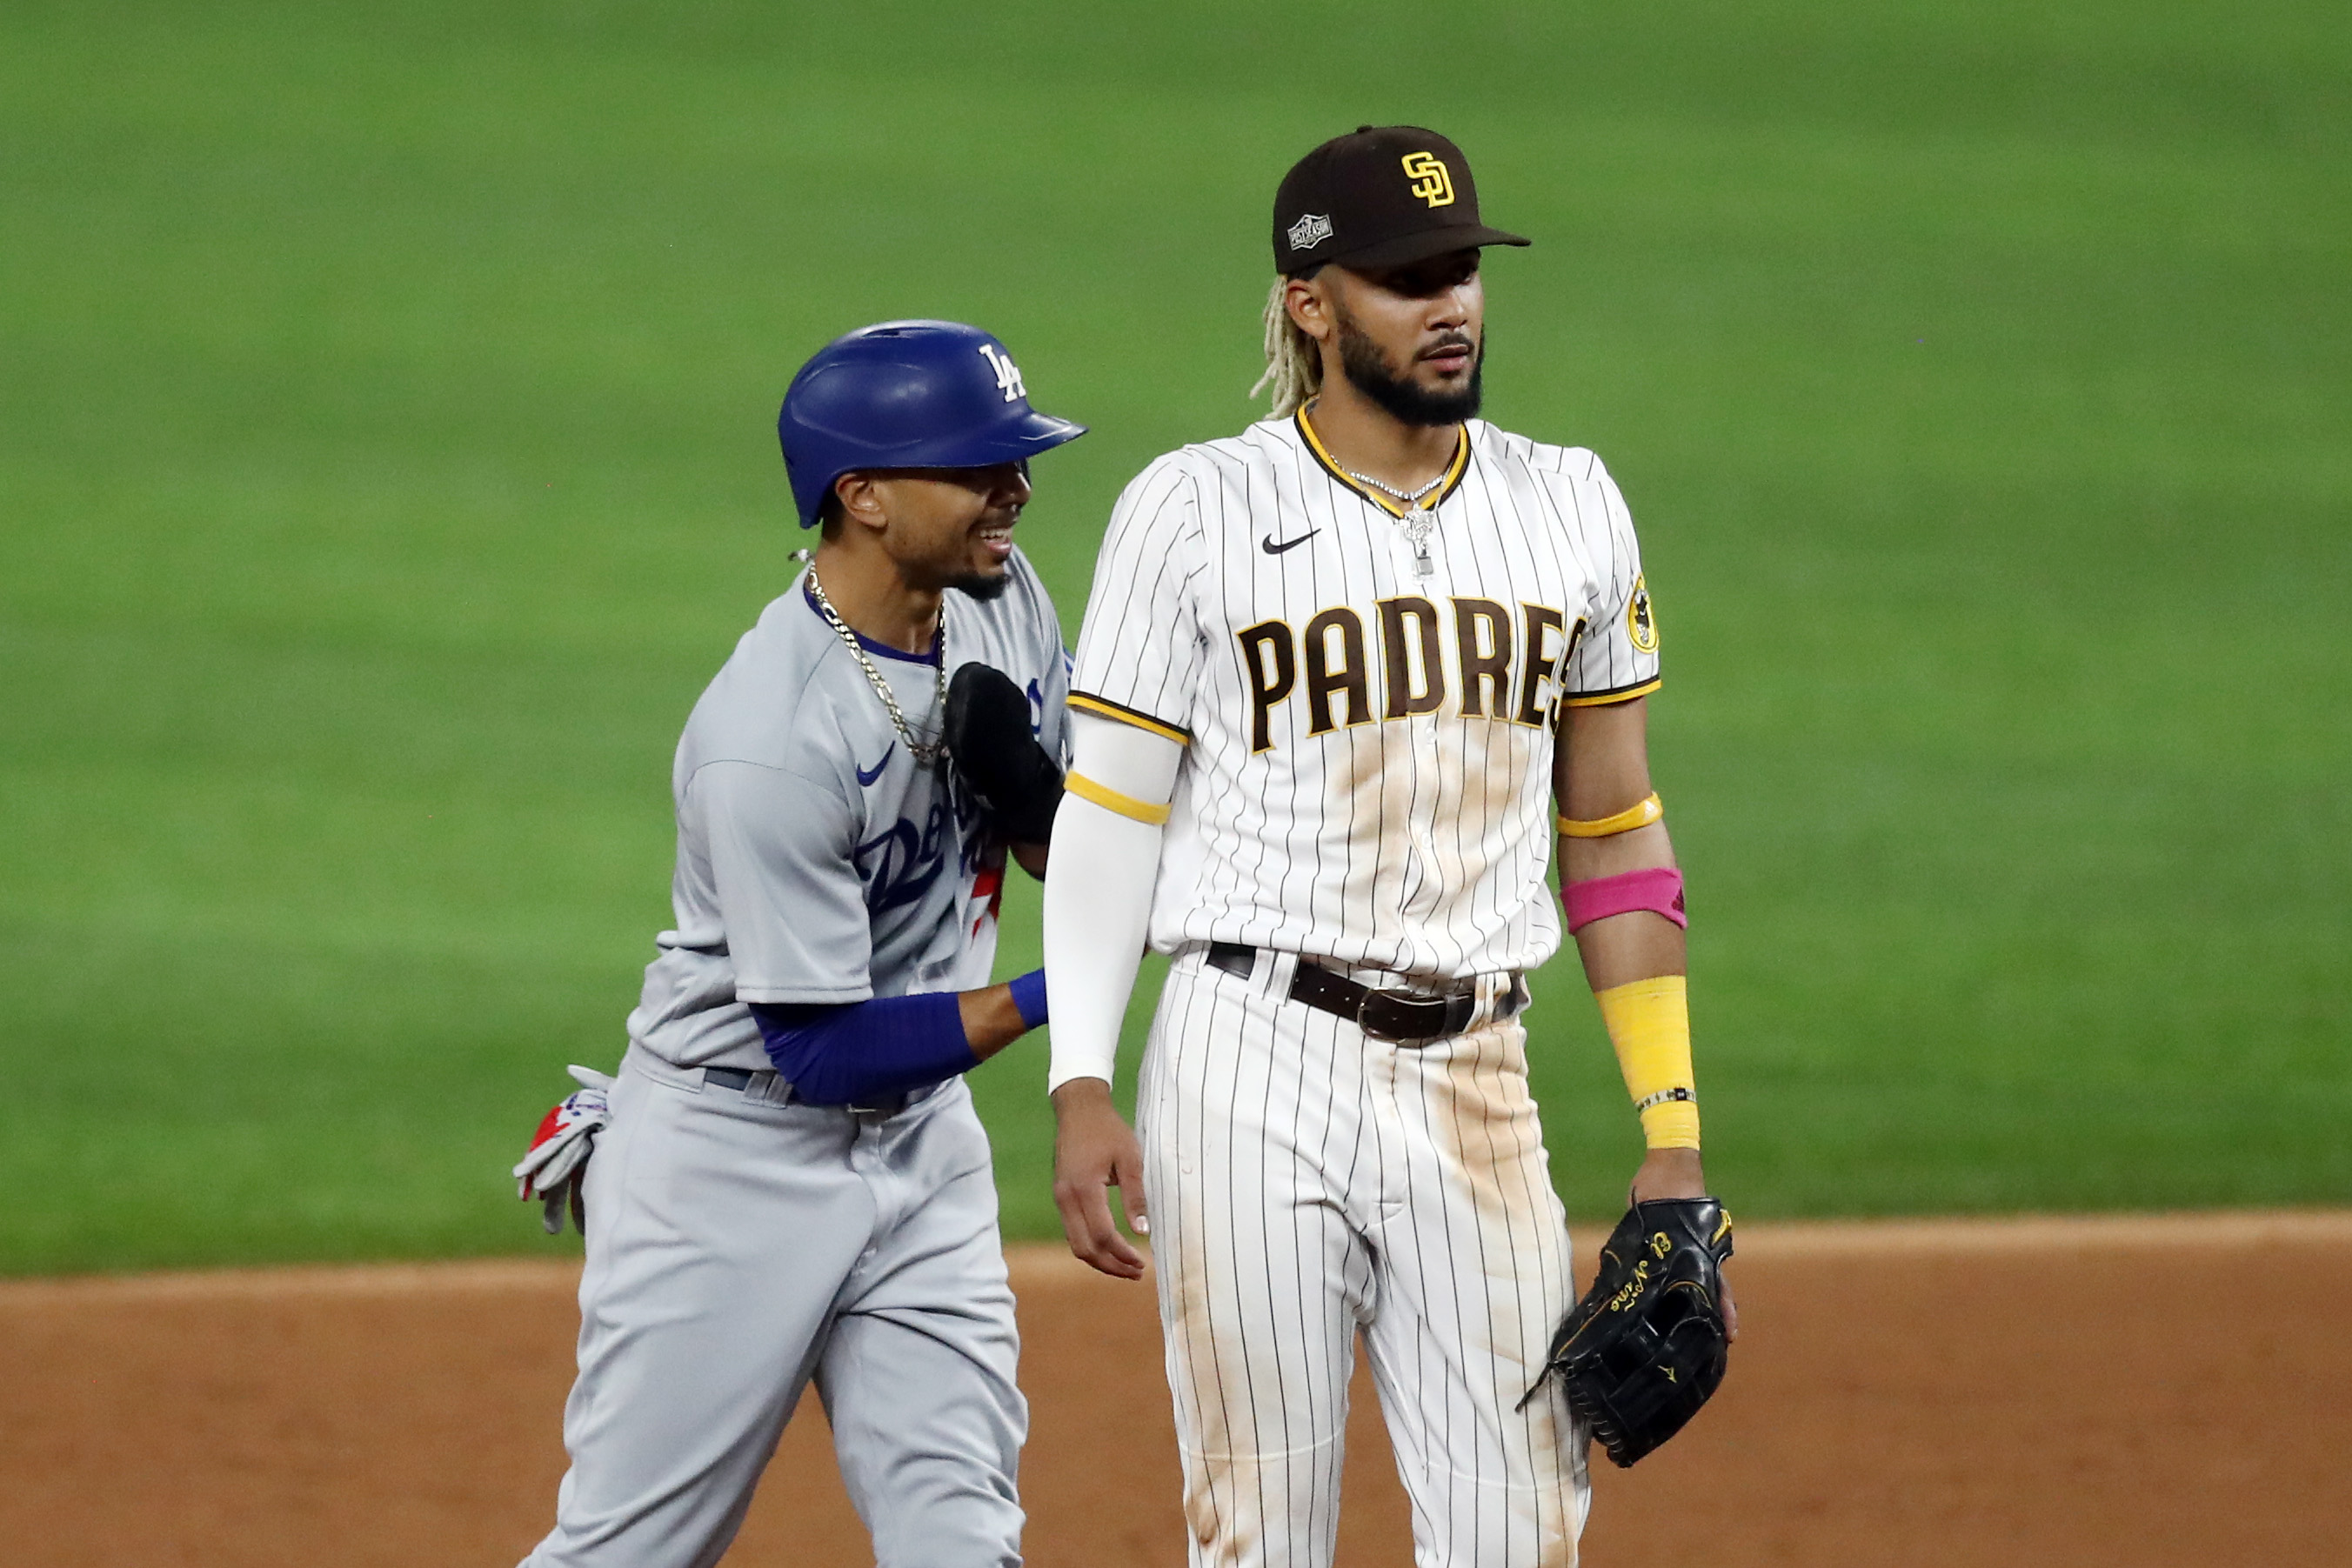 LISTEN On Friar Podcast – Tatis Looks Good, Lamet and Dodgers Coming to Town